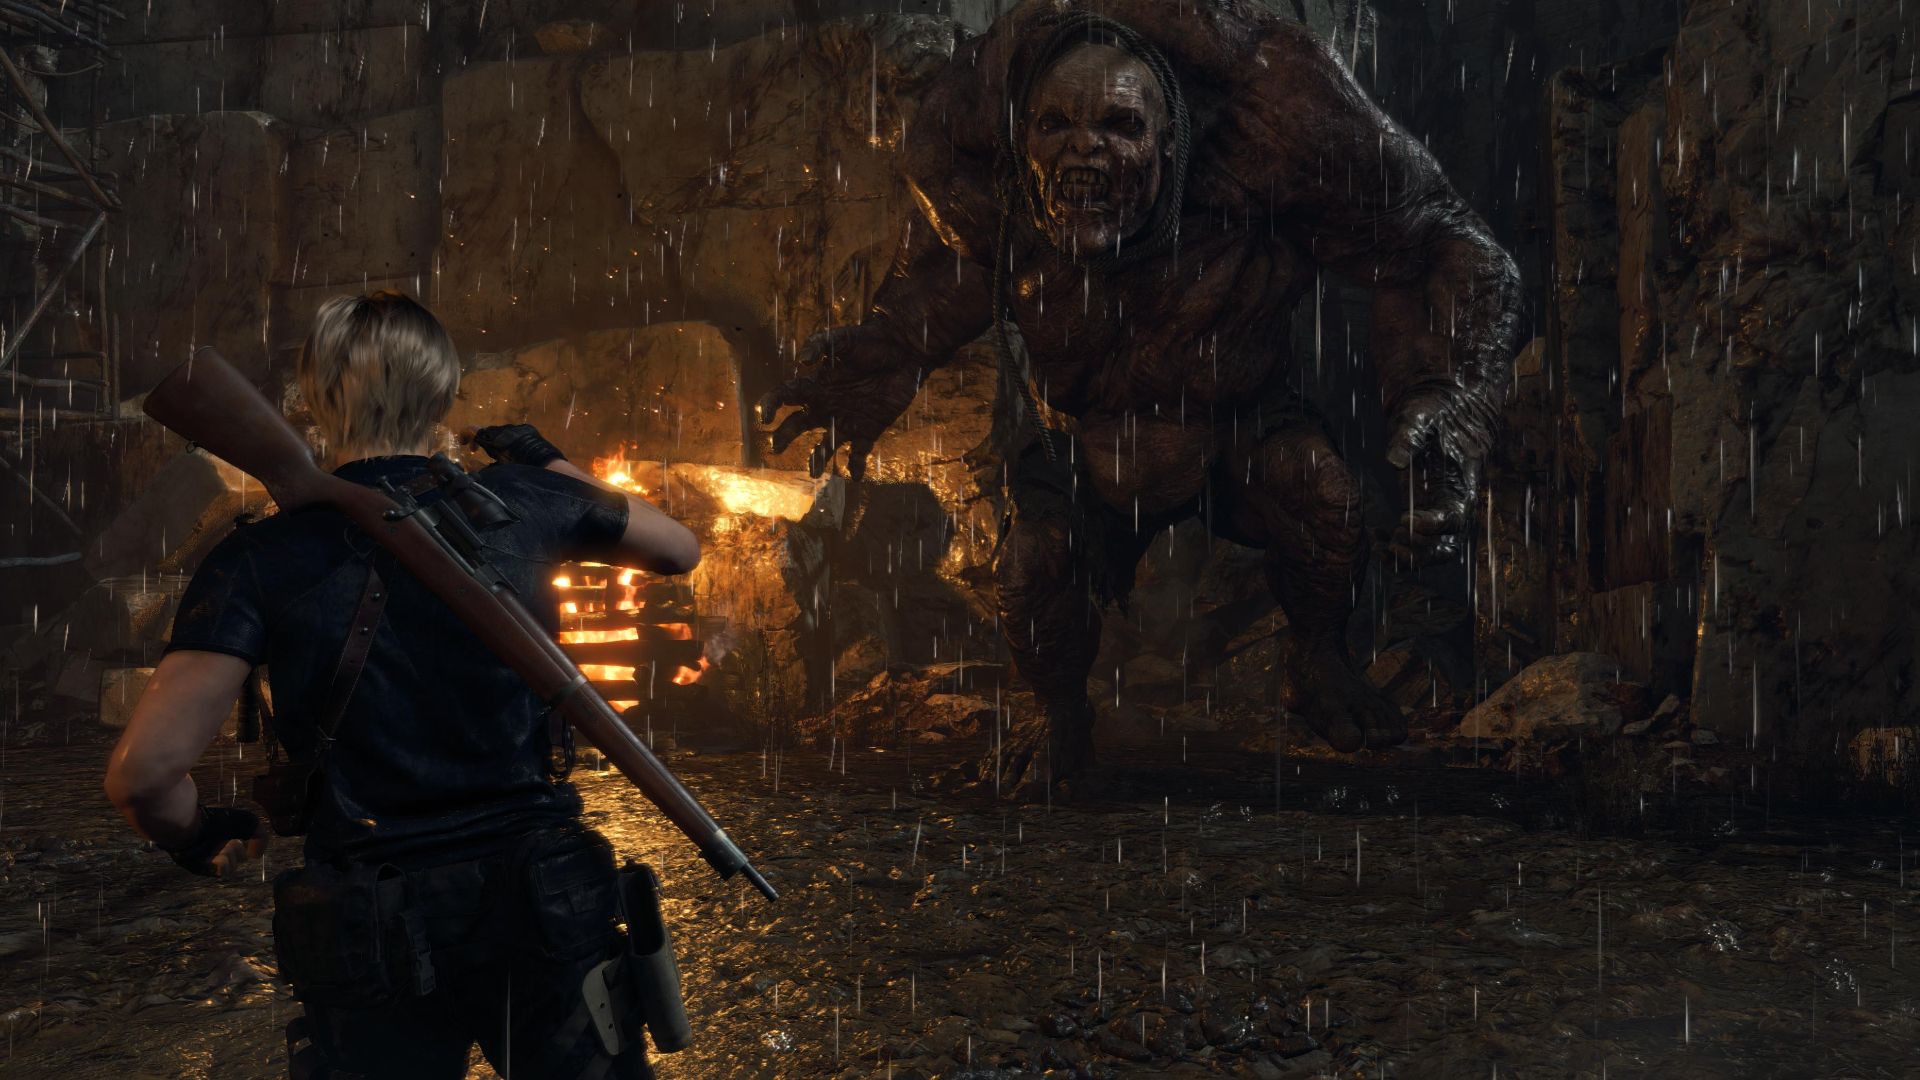 Leon standing in the rain as a giant approaches in the remake of Resident Evil 4